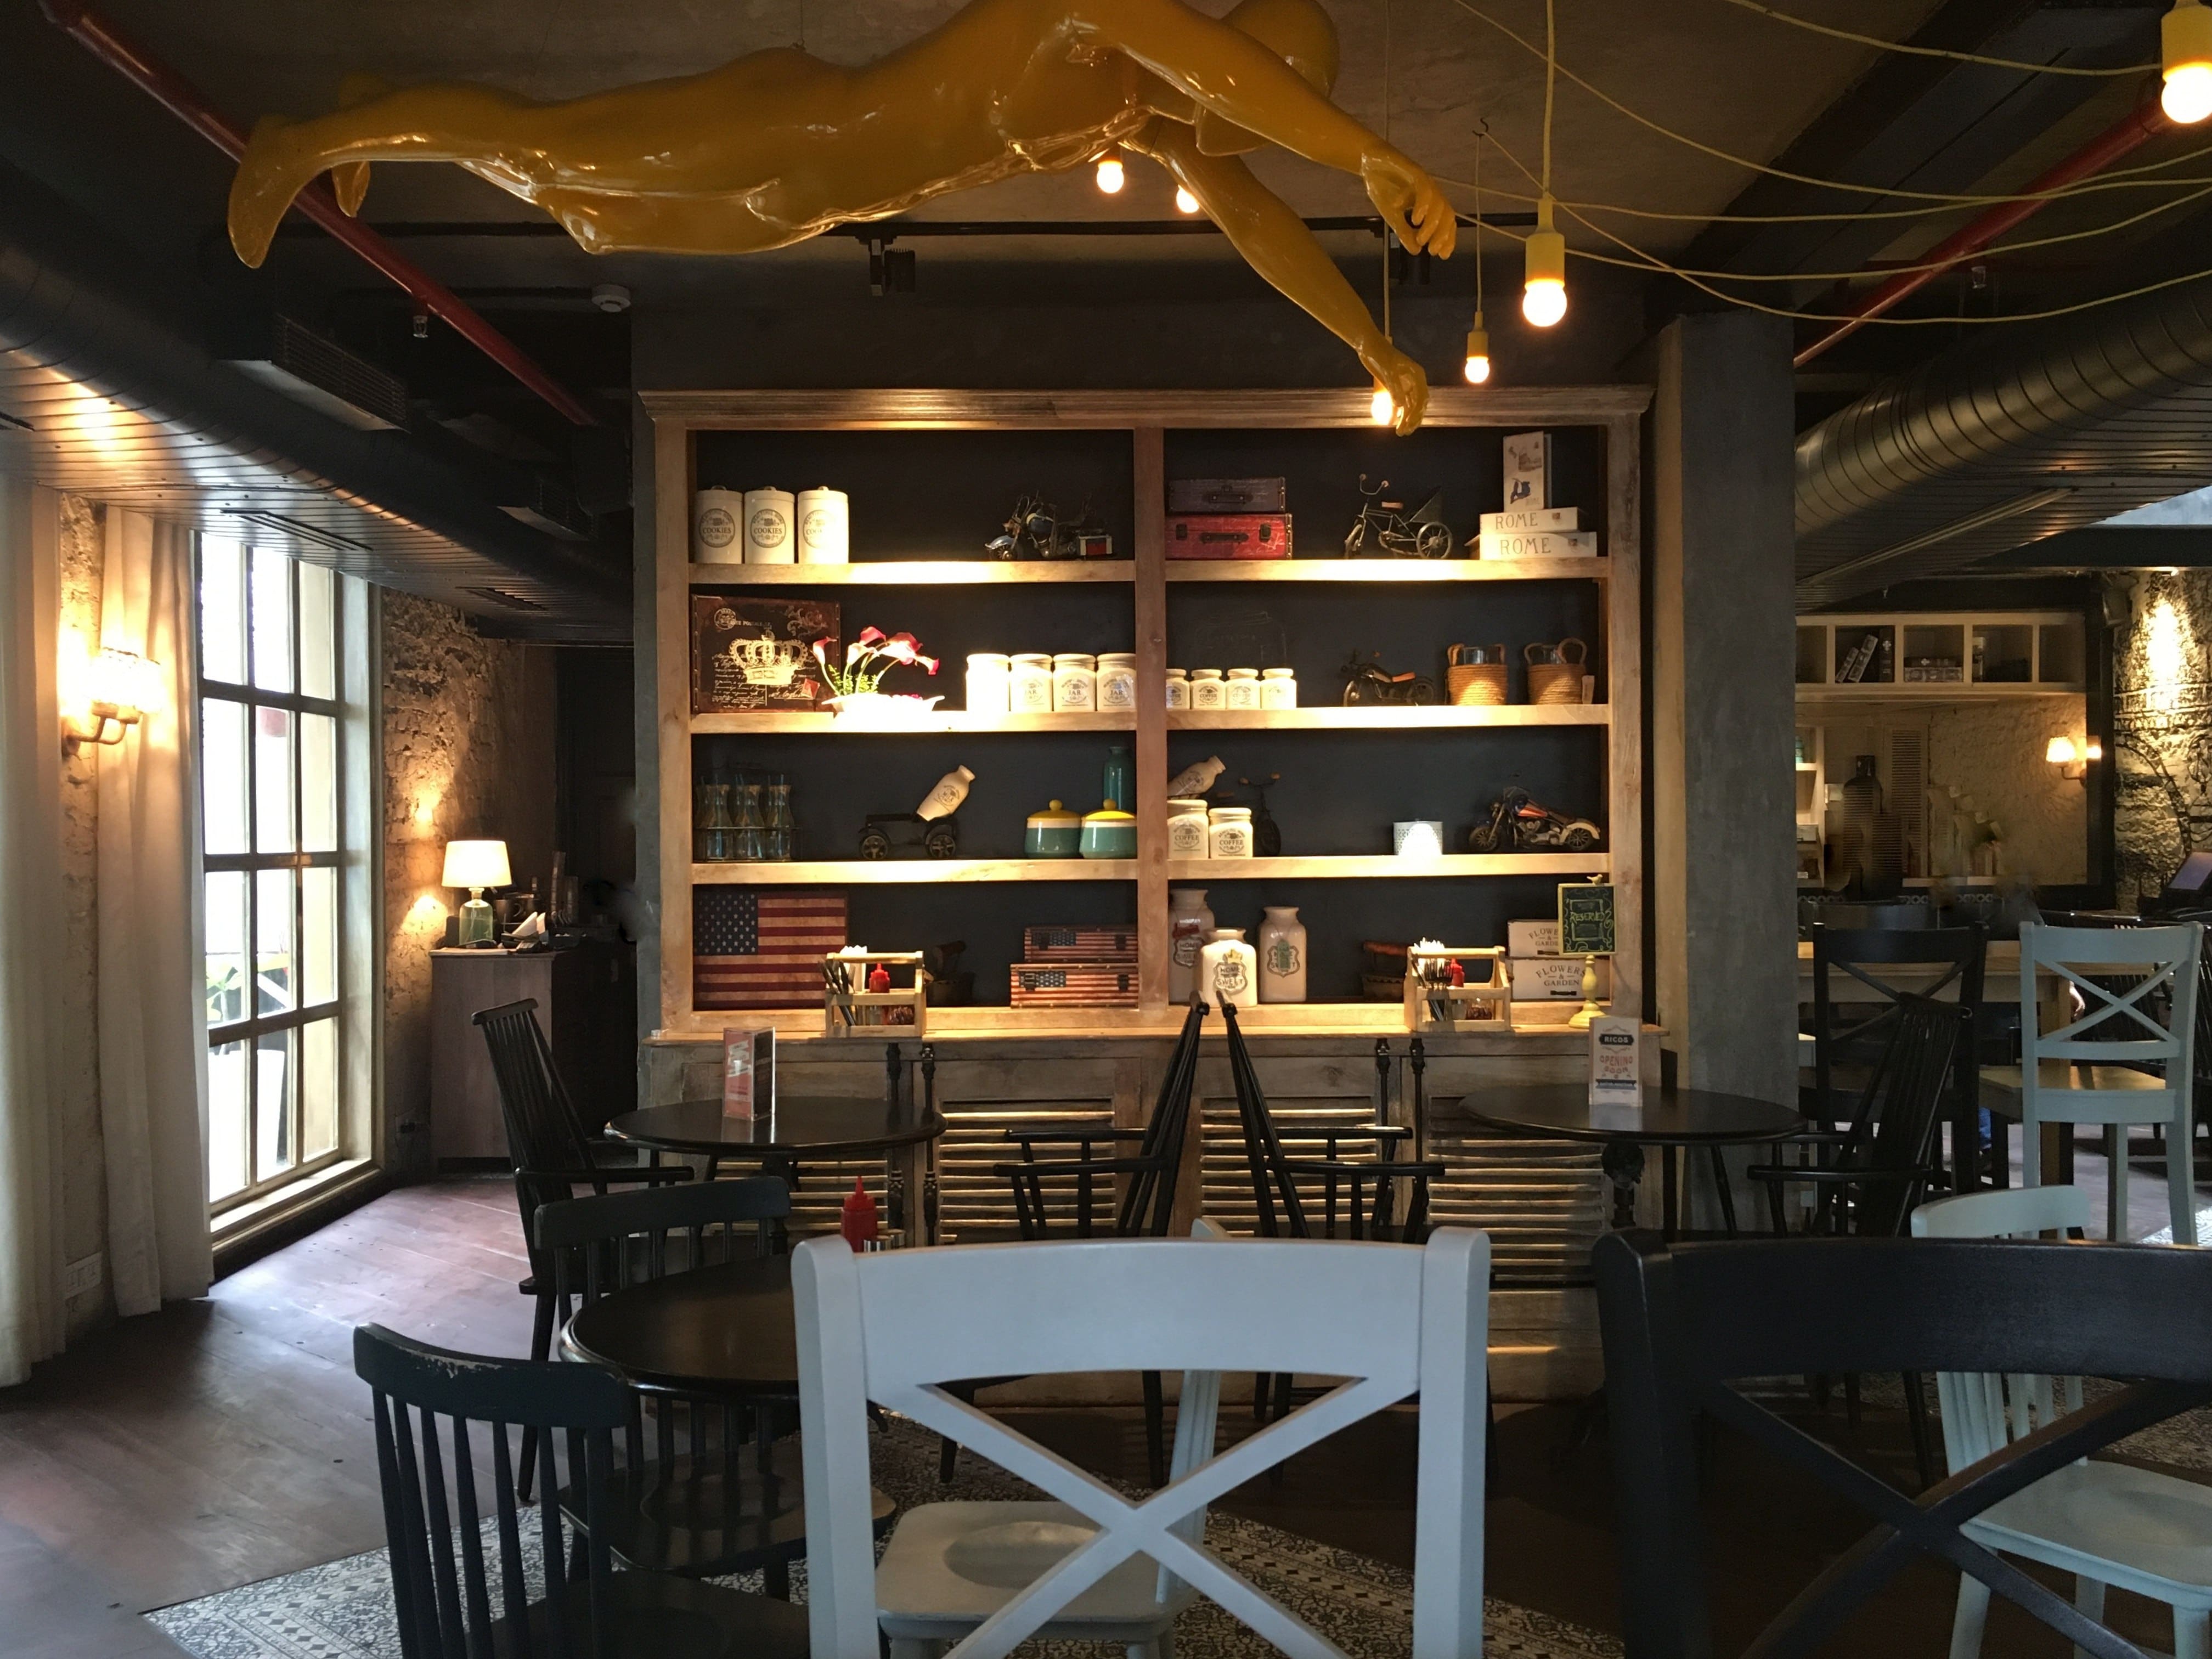 Photos of Cafeteria & Co., Pictures of Cafeteria & Co., New Delhi | Zomato